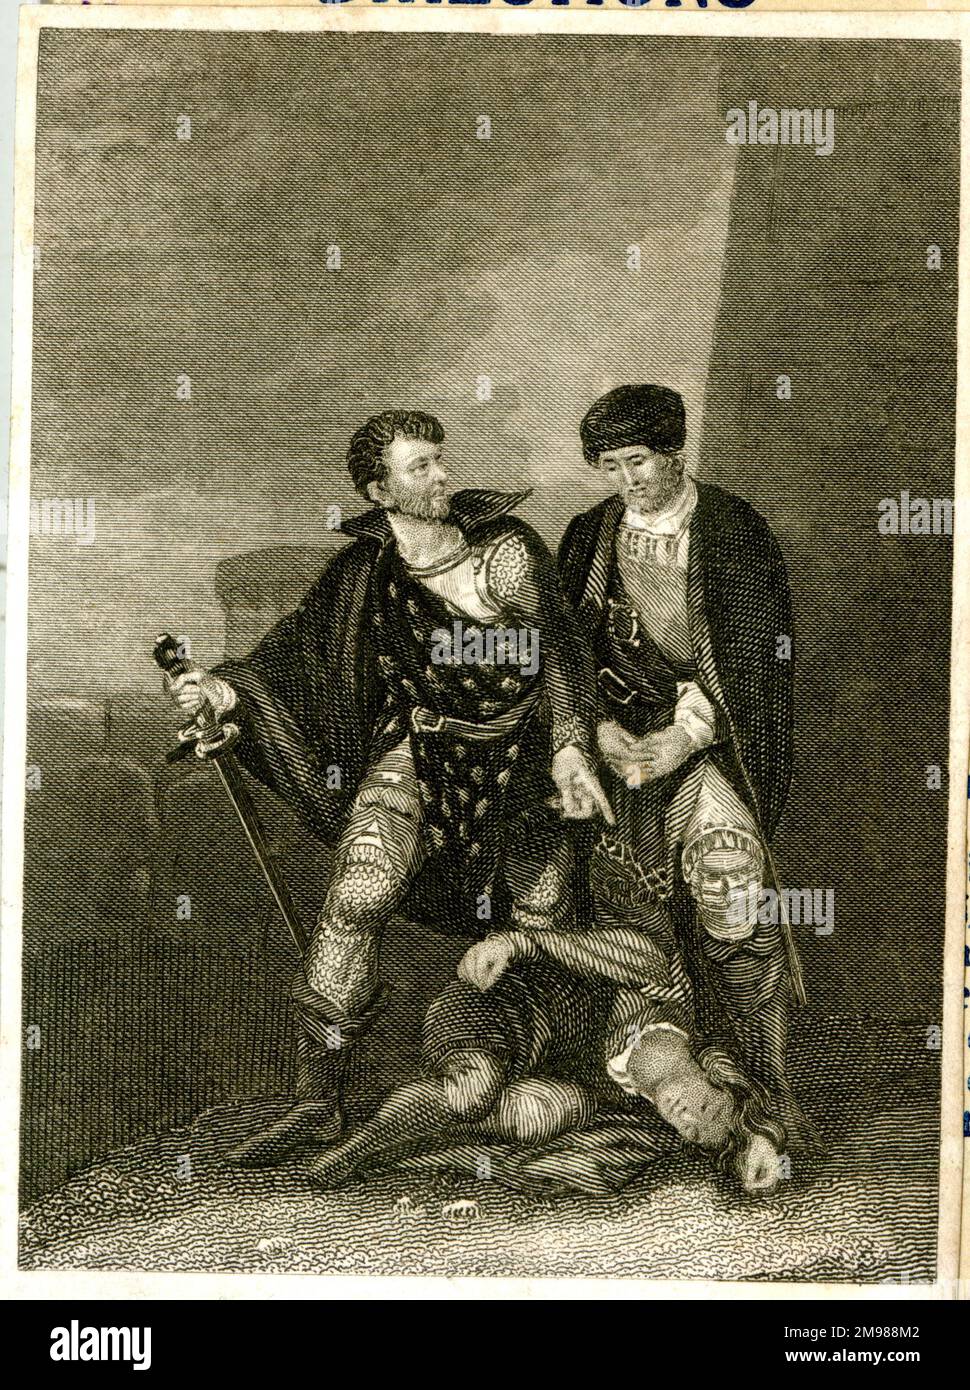 Death of Prince Arthur -- the young Prince Arthur, Duke of Brittany, is thought to have been murdered on the orders of his uncle, King John.  Previously, Arthur had been imprisoned in the Chateau de Falaise, but disappeared in April 1203. Stock Photo